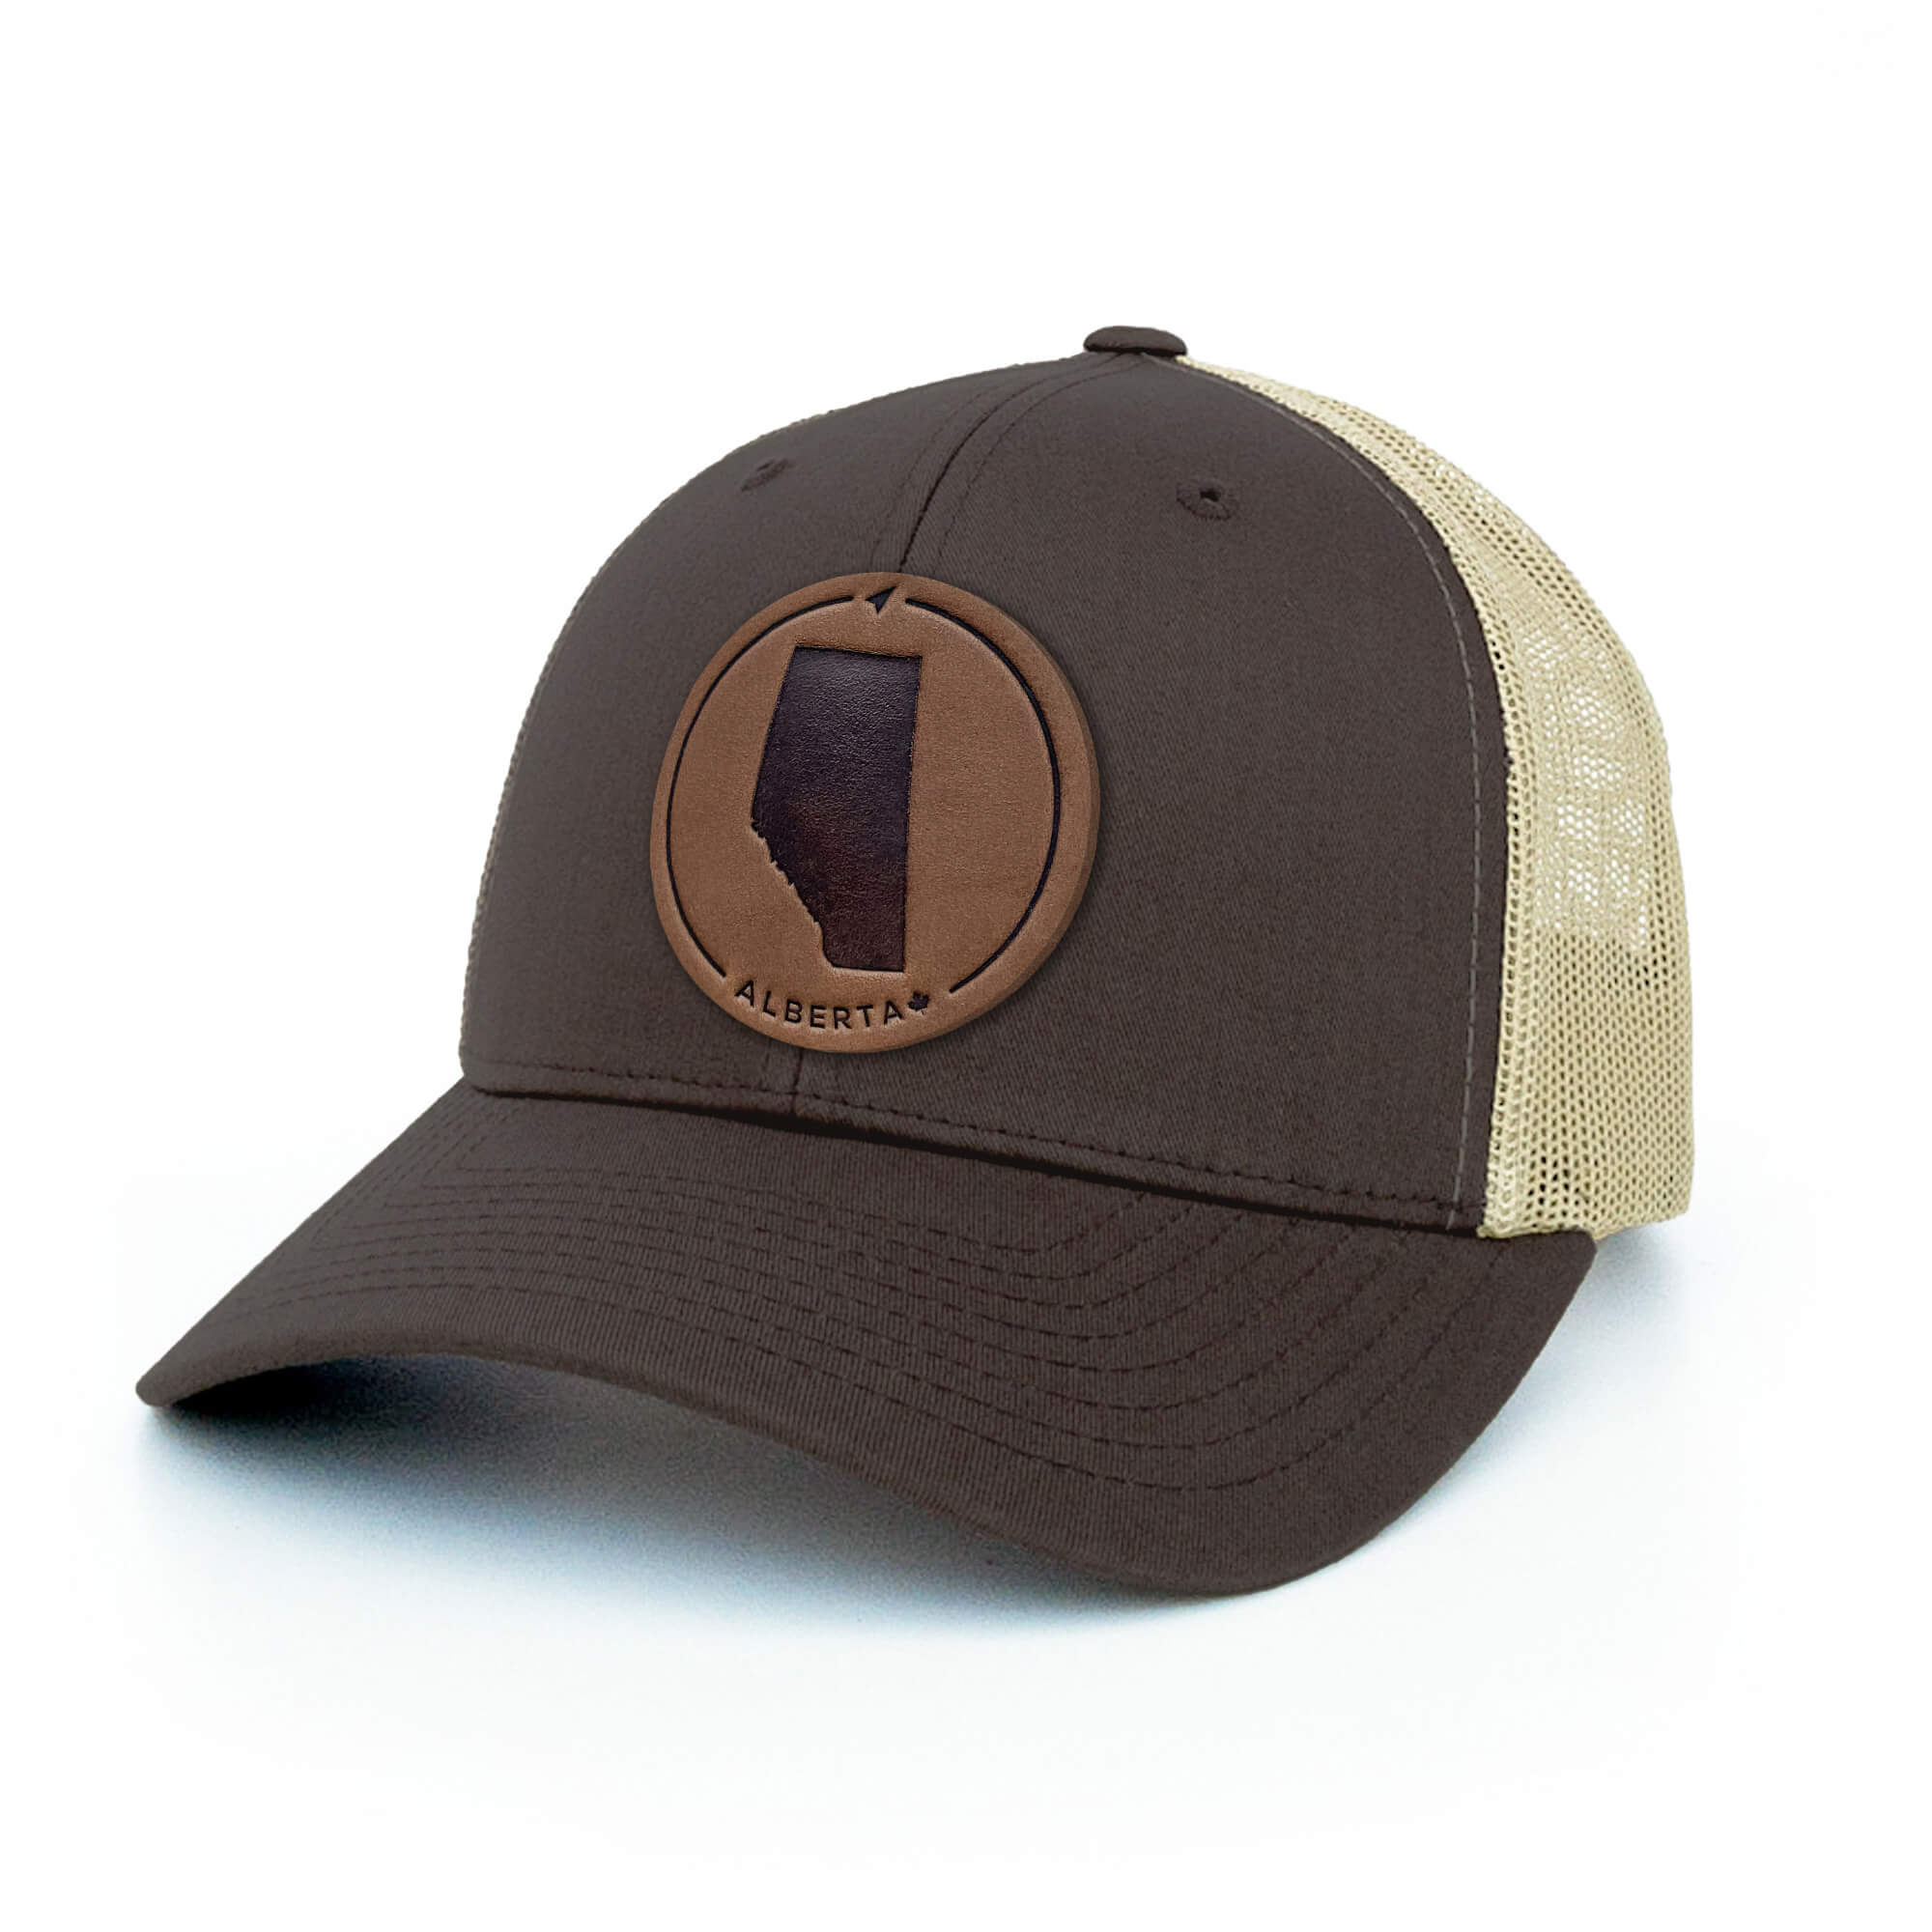 Brown and khaki trucker hat with full-grain leather patch of Alberta | BLACK-002-005, CHARC-002-005, NAVY-002-005, HGREY-002-005, MOSS-002-005, BROWN-002-005